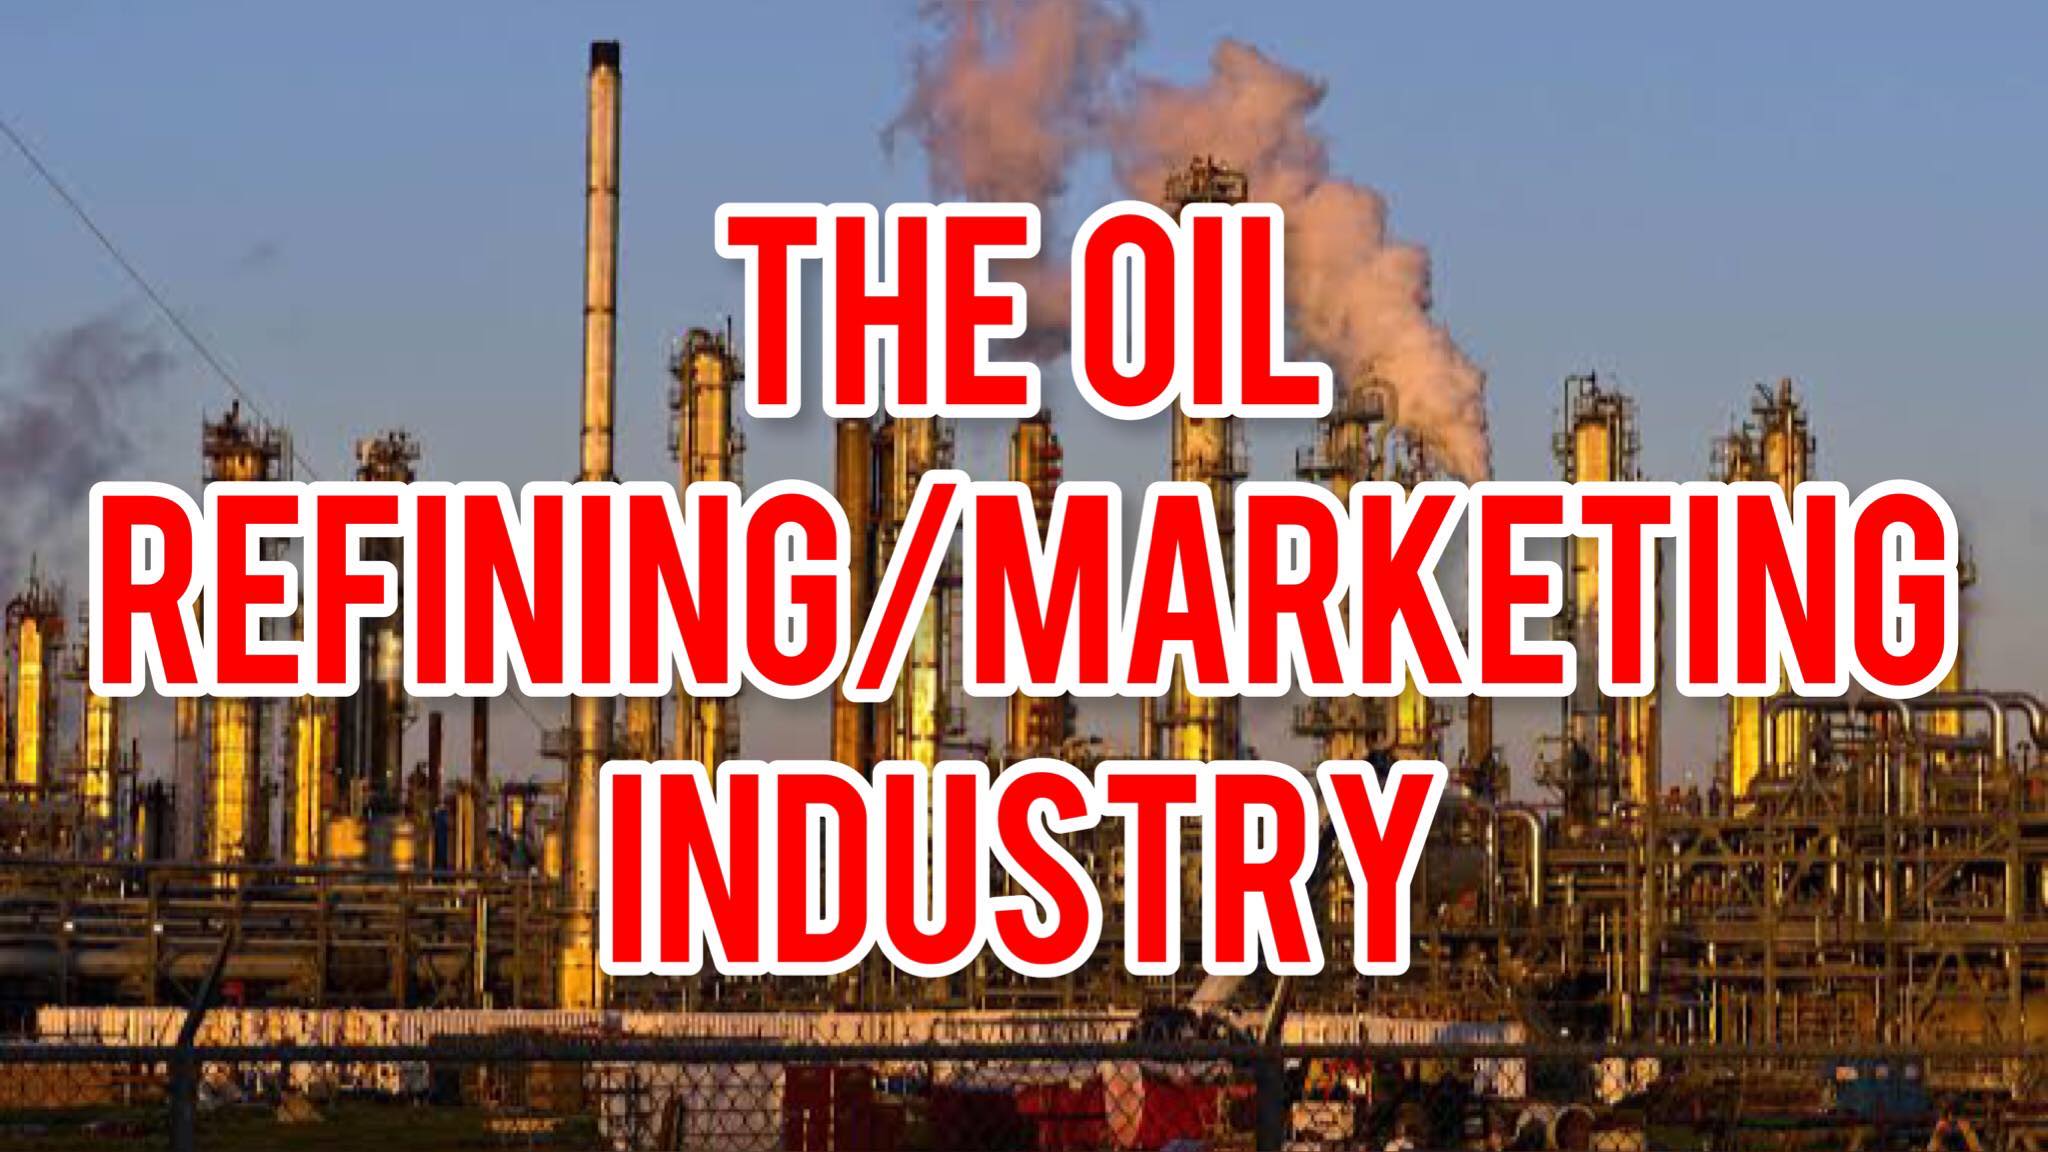 How Many Jobs Are Available In Oil Refining/Marketing